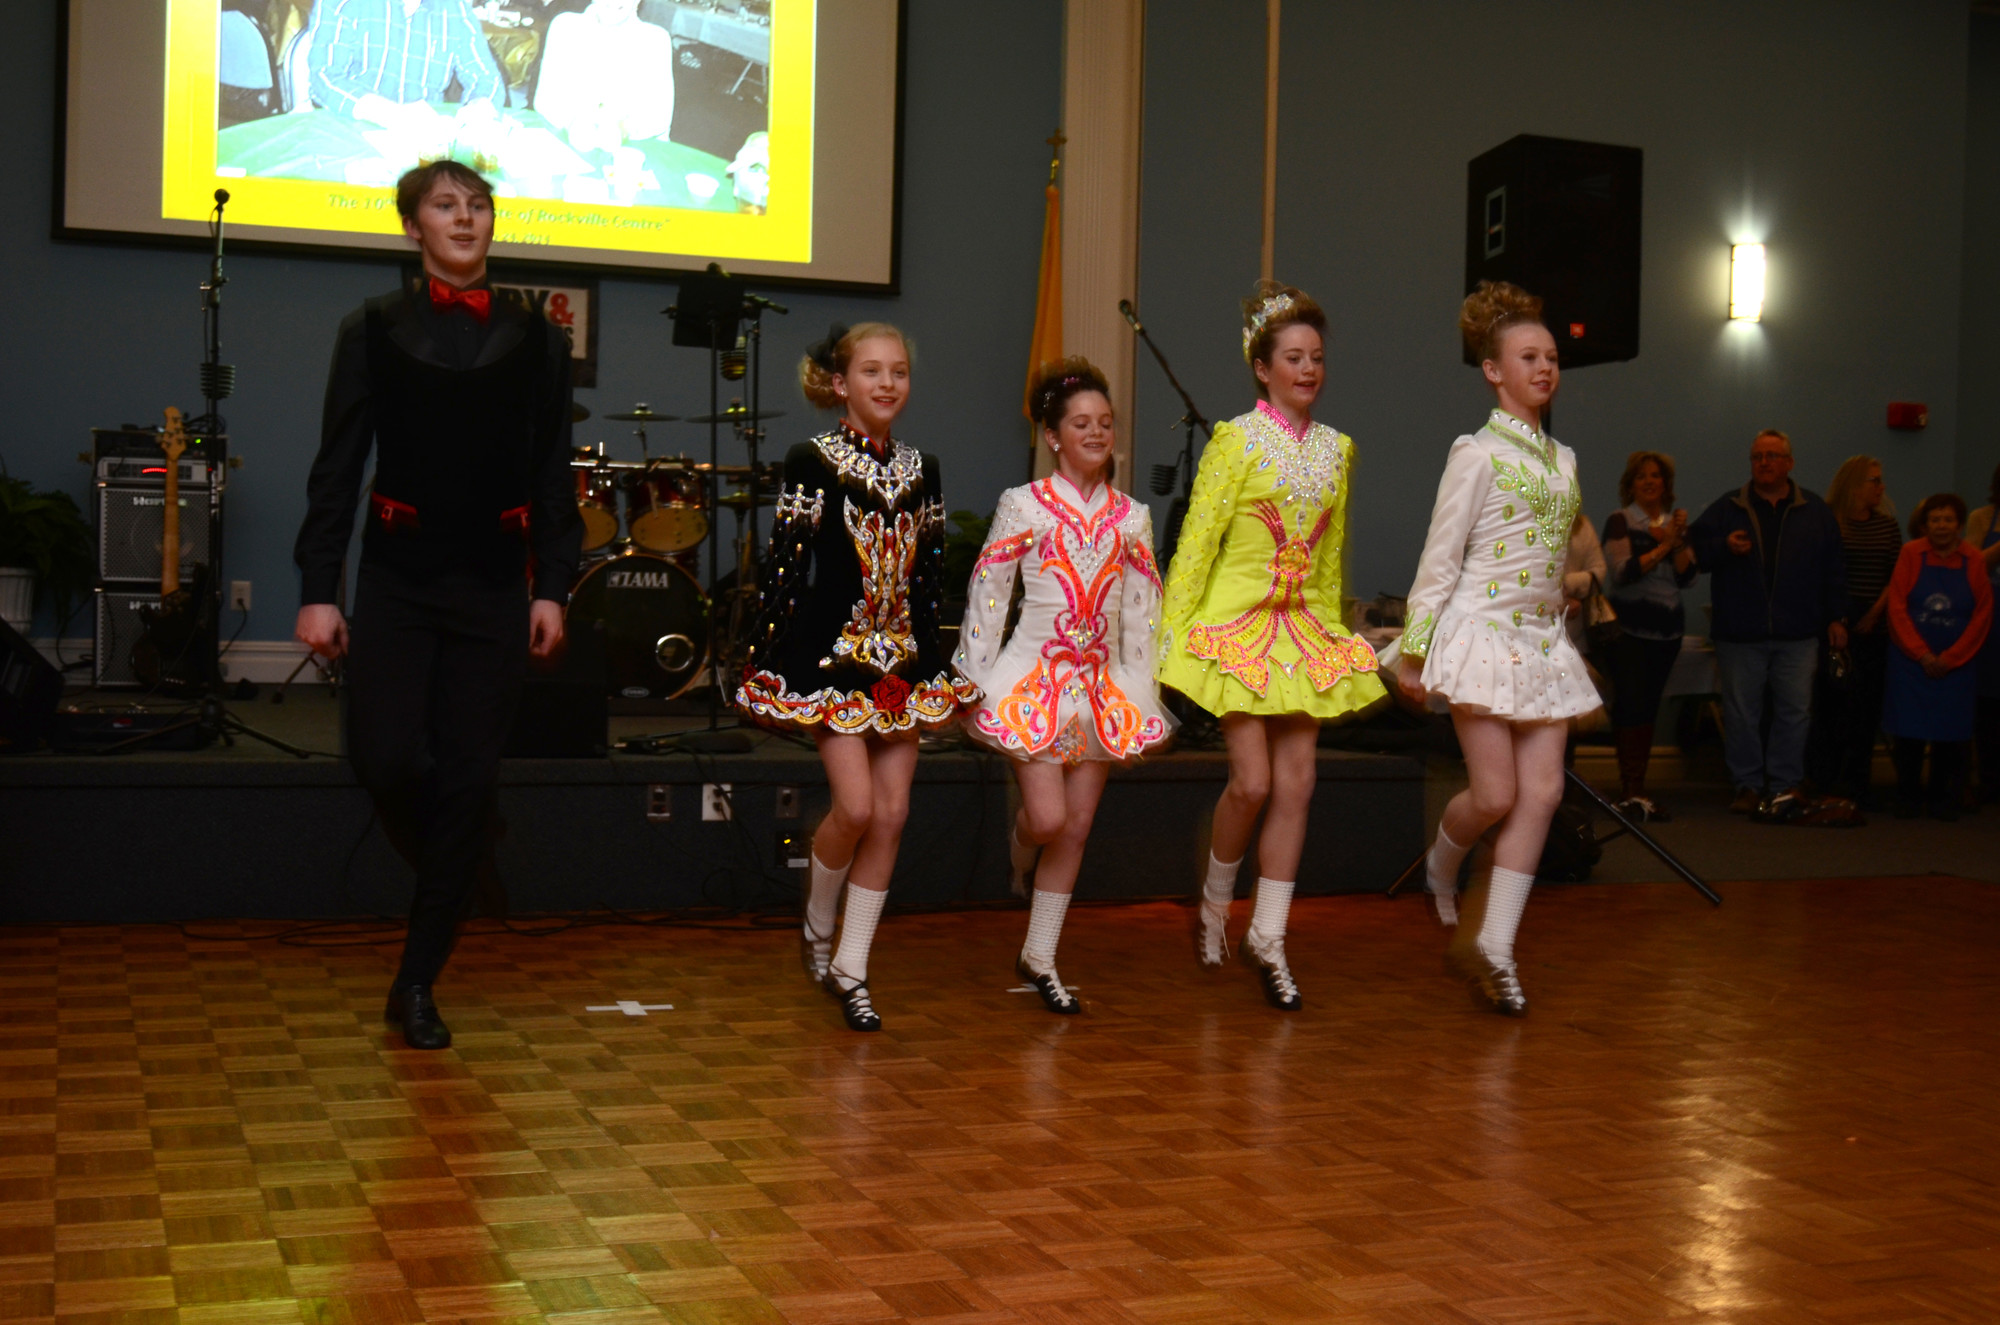 Shephard Sommers of Rockville Centre, left, Abigail Story of Baldwin, Madison Brower of Rockville Centre, Julia Meyers of Long Beach and Samantha Cosgrove of Rockville Centre, members of the Hagen School of Irish Dance, danced to Big Reel during the food and wine tasting.